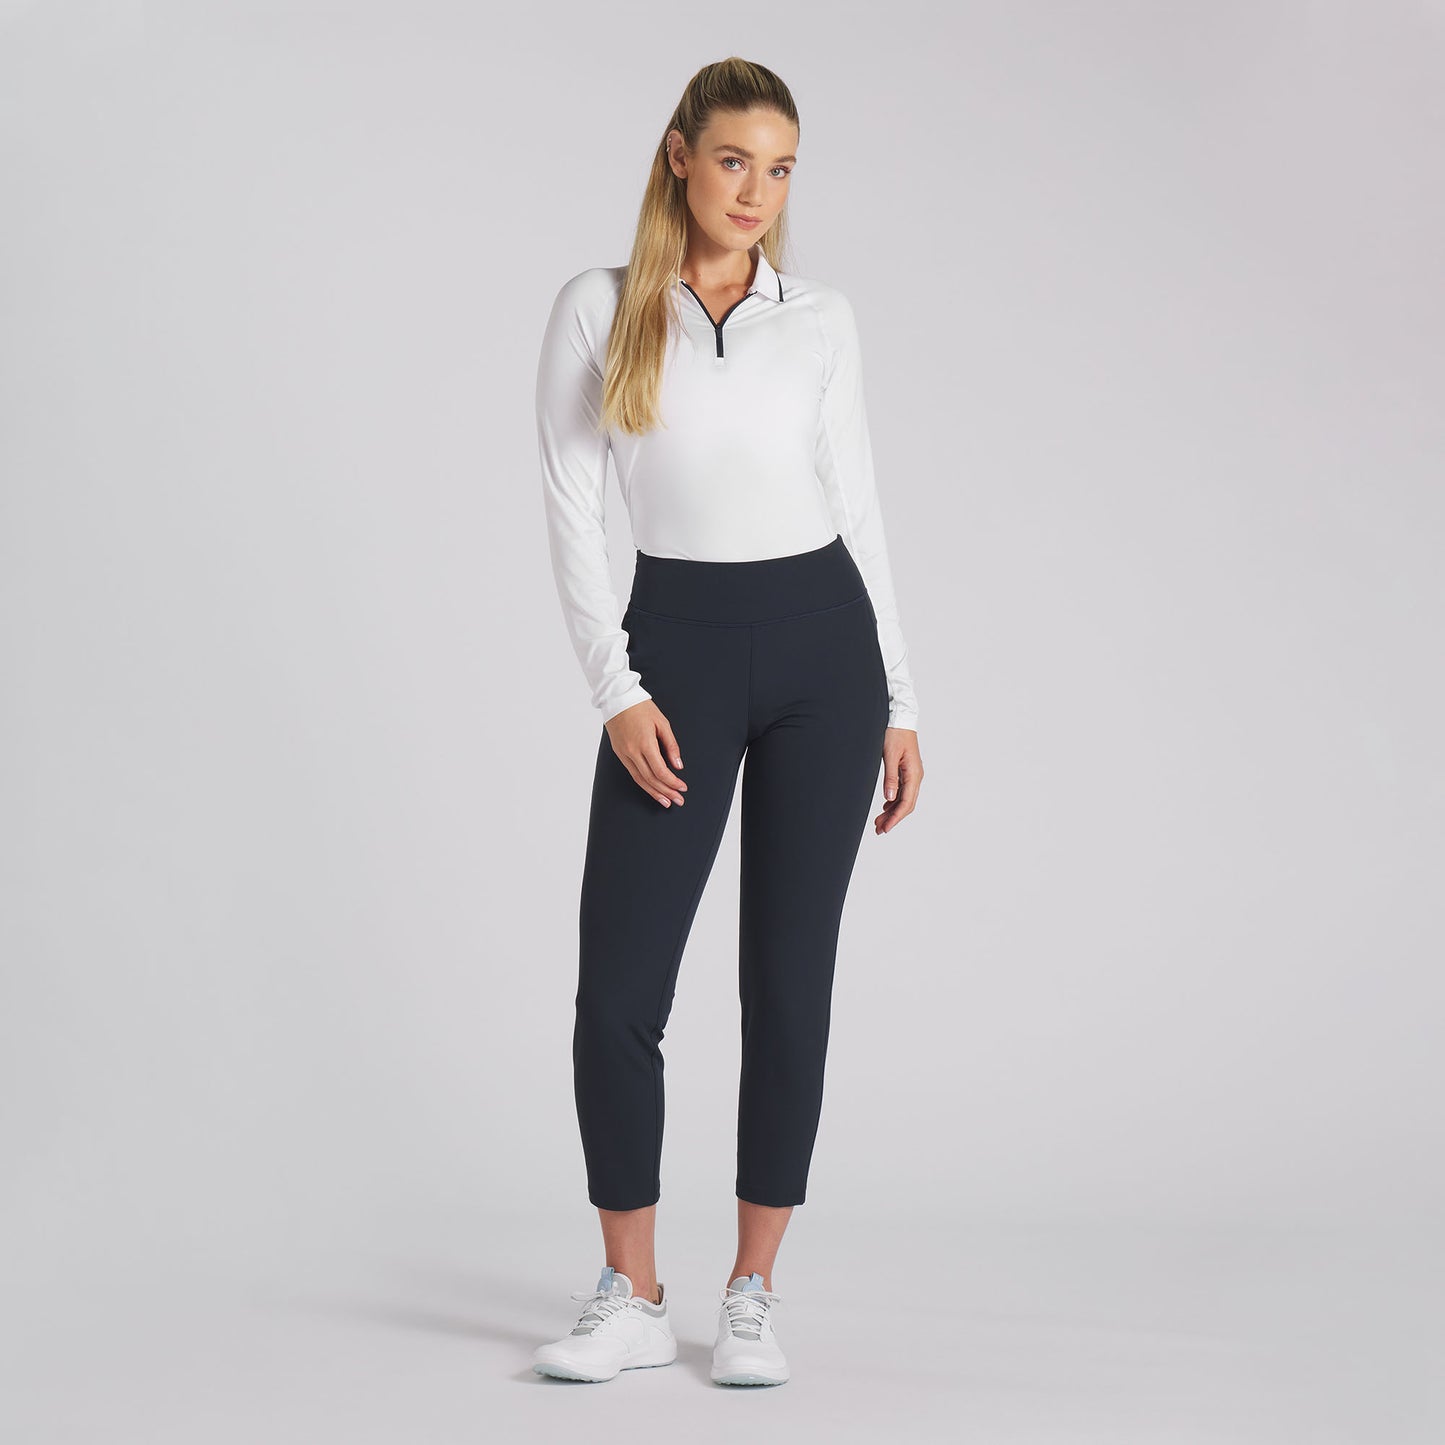 Puma Ladies High Rise 7/8 Trousers in Deep Navy